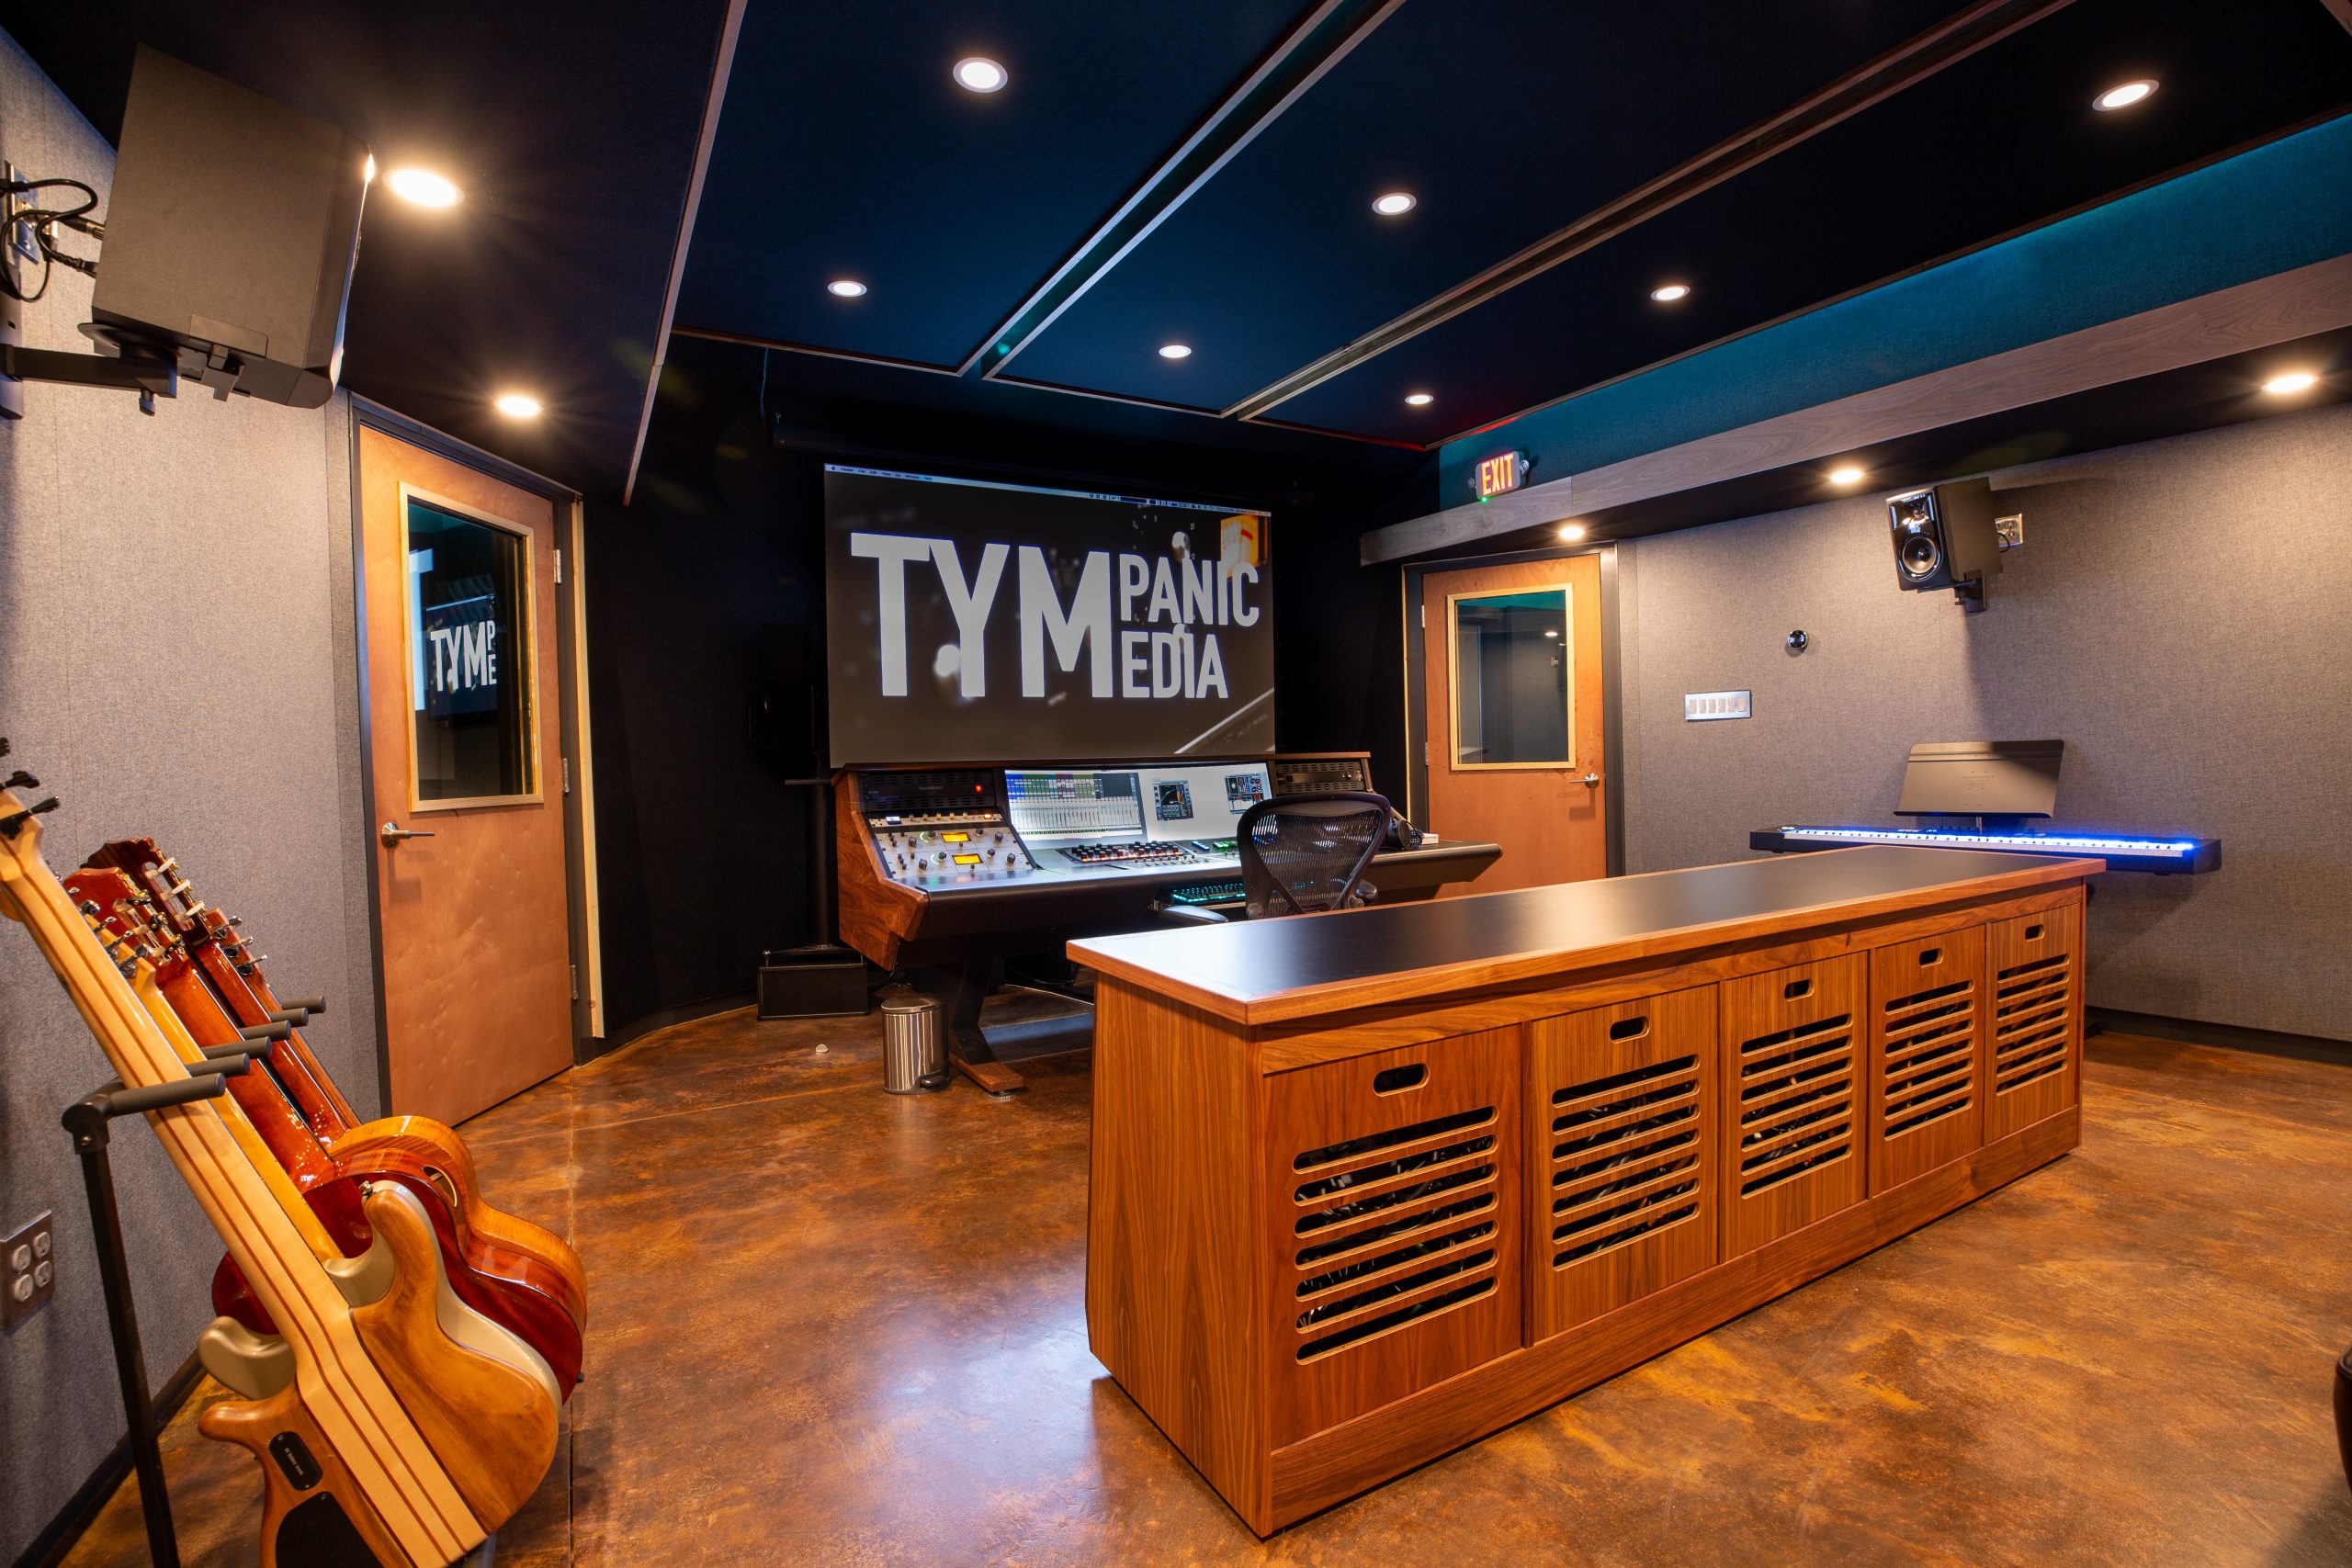 Tympanic Media Control Room in Post-Production Mode